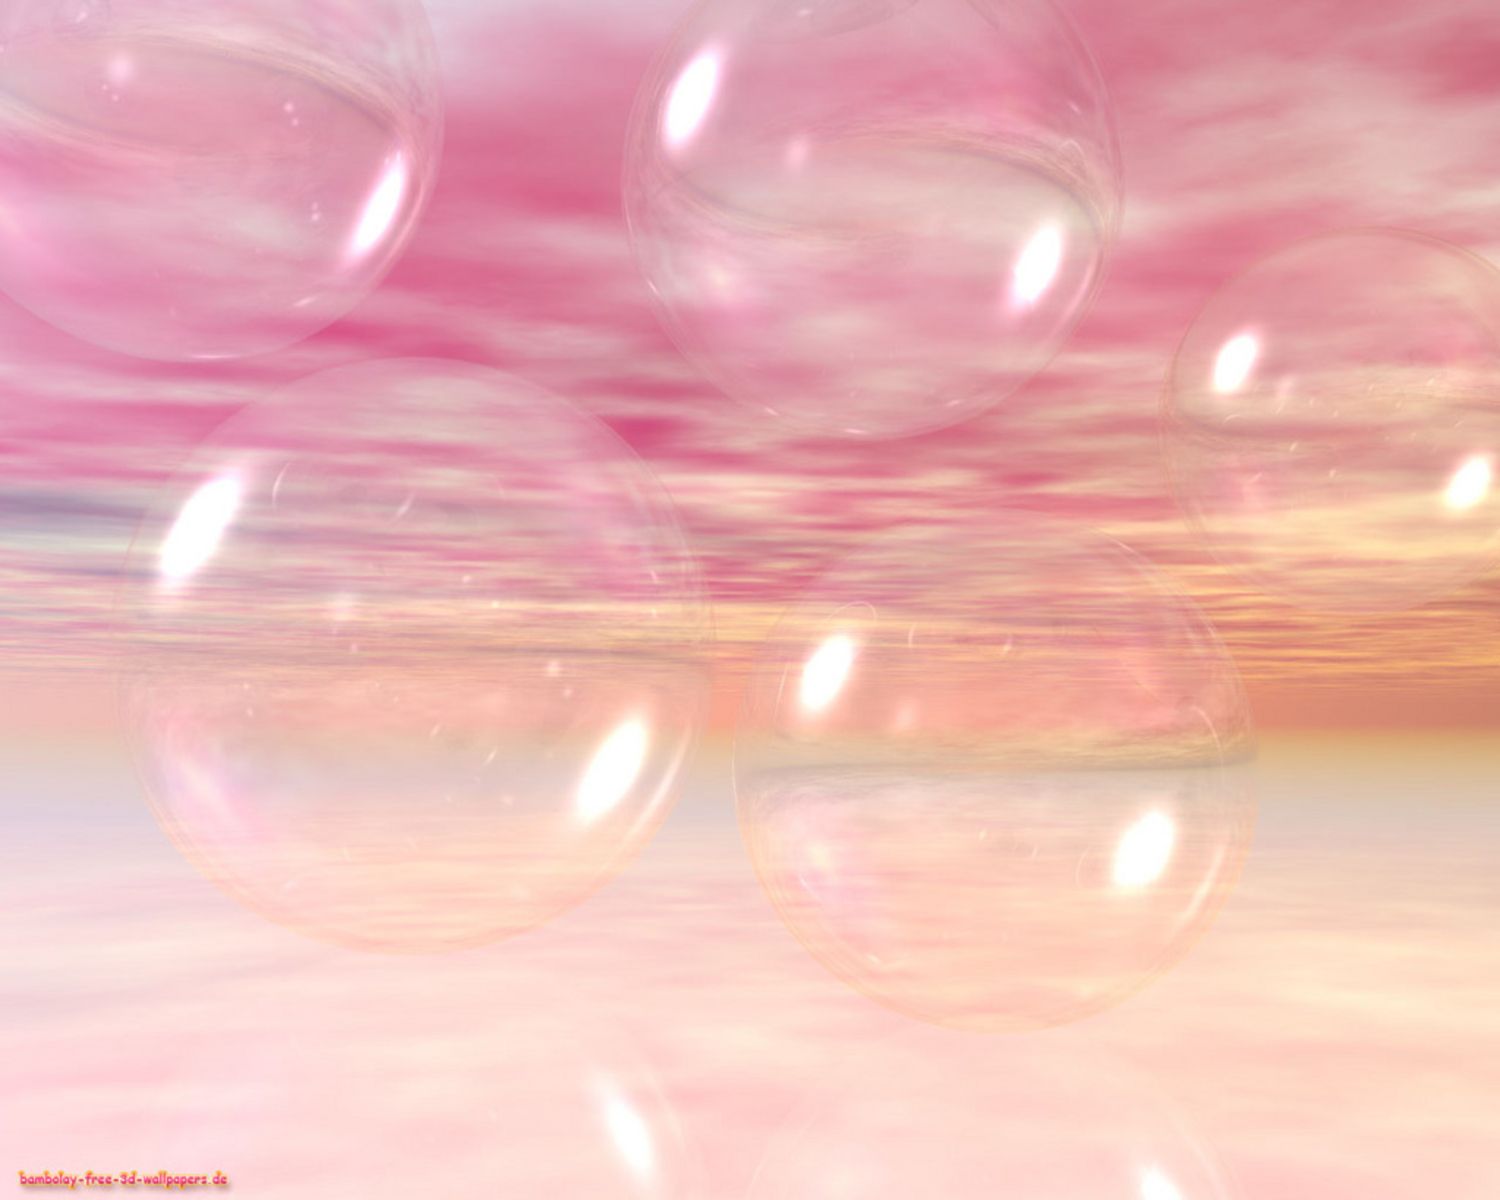 A picture of some bubbles in the sky - Bubbles